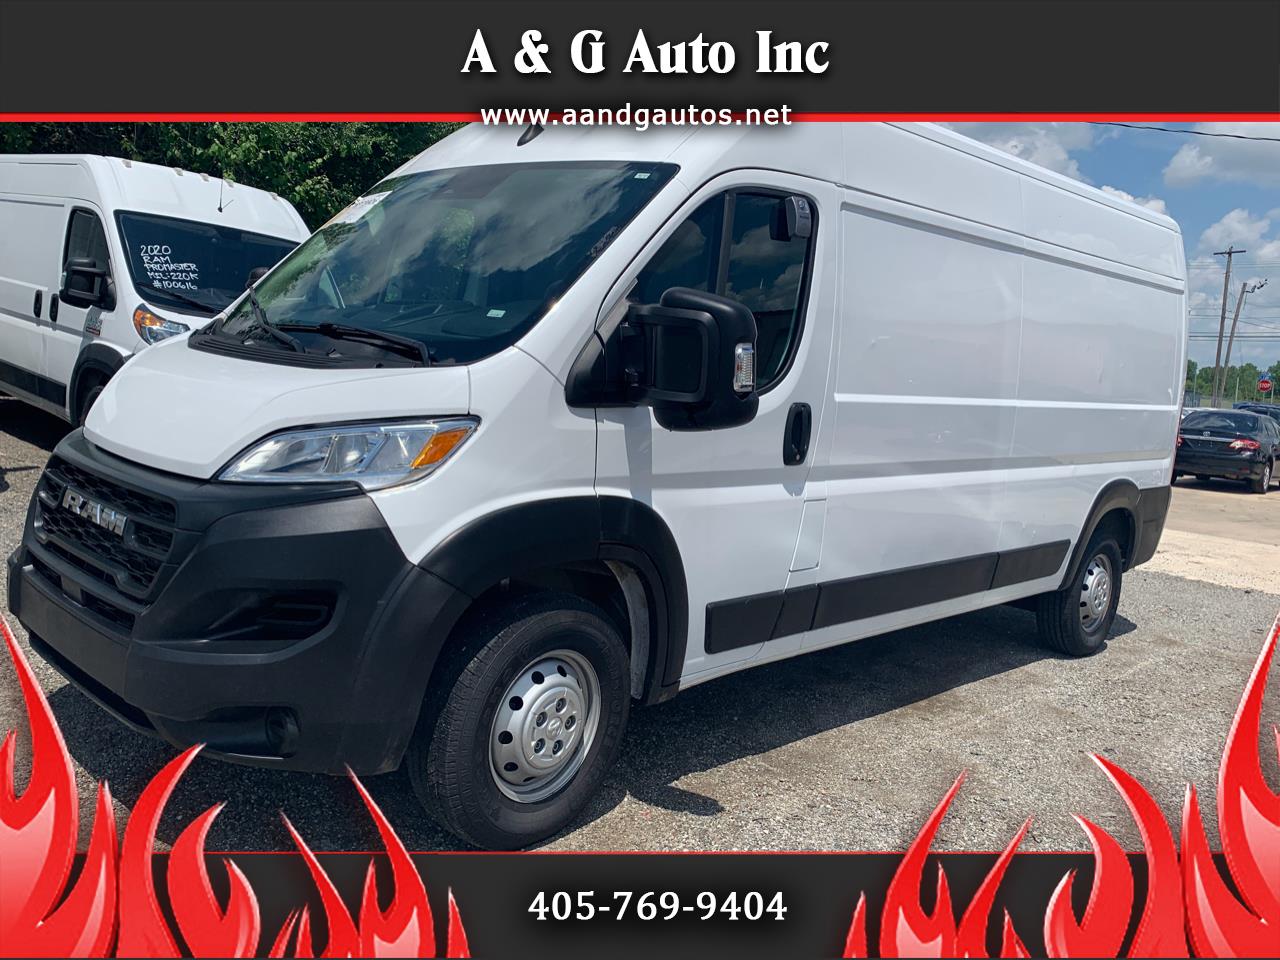 2023 RAM Promaster for sale in Oklahoma City OK 73141 by A & G Auto Inc